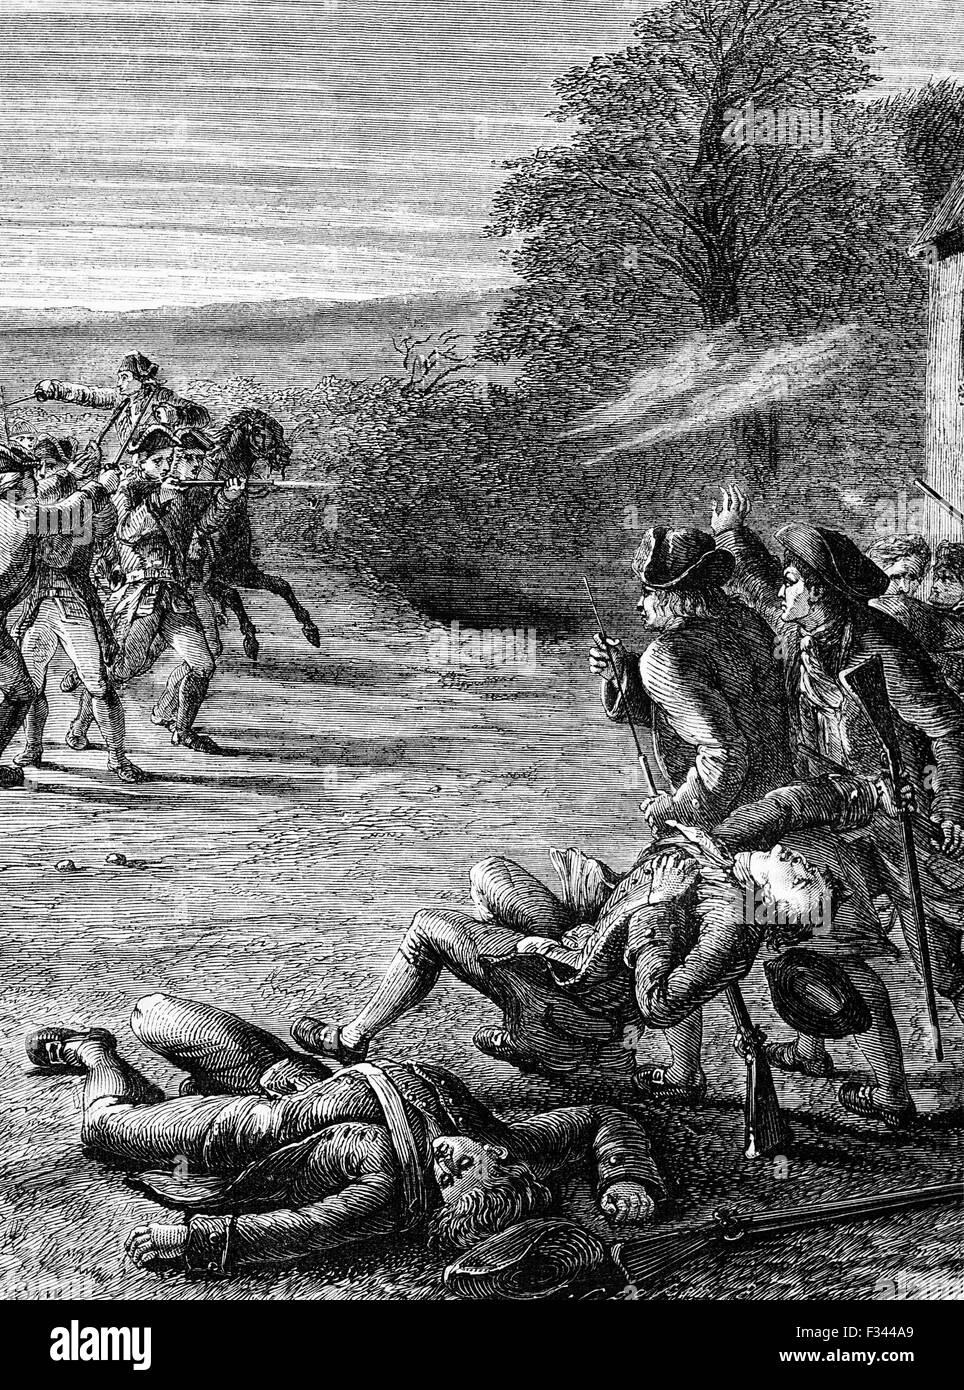 Skirmishes at Lexington, the first military engagements of the American Revolutionary War fought on April 19, 1775.  This and later battles marked the outbreak of open armed conflict between the Kingdom of Great Britain and its thirteen colonies in the mainland of British North America. Stock Photo